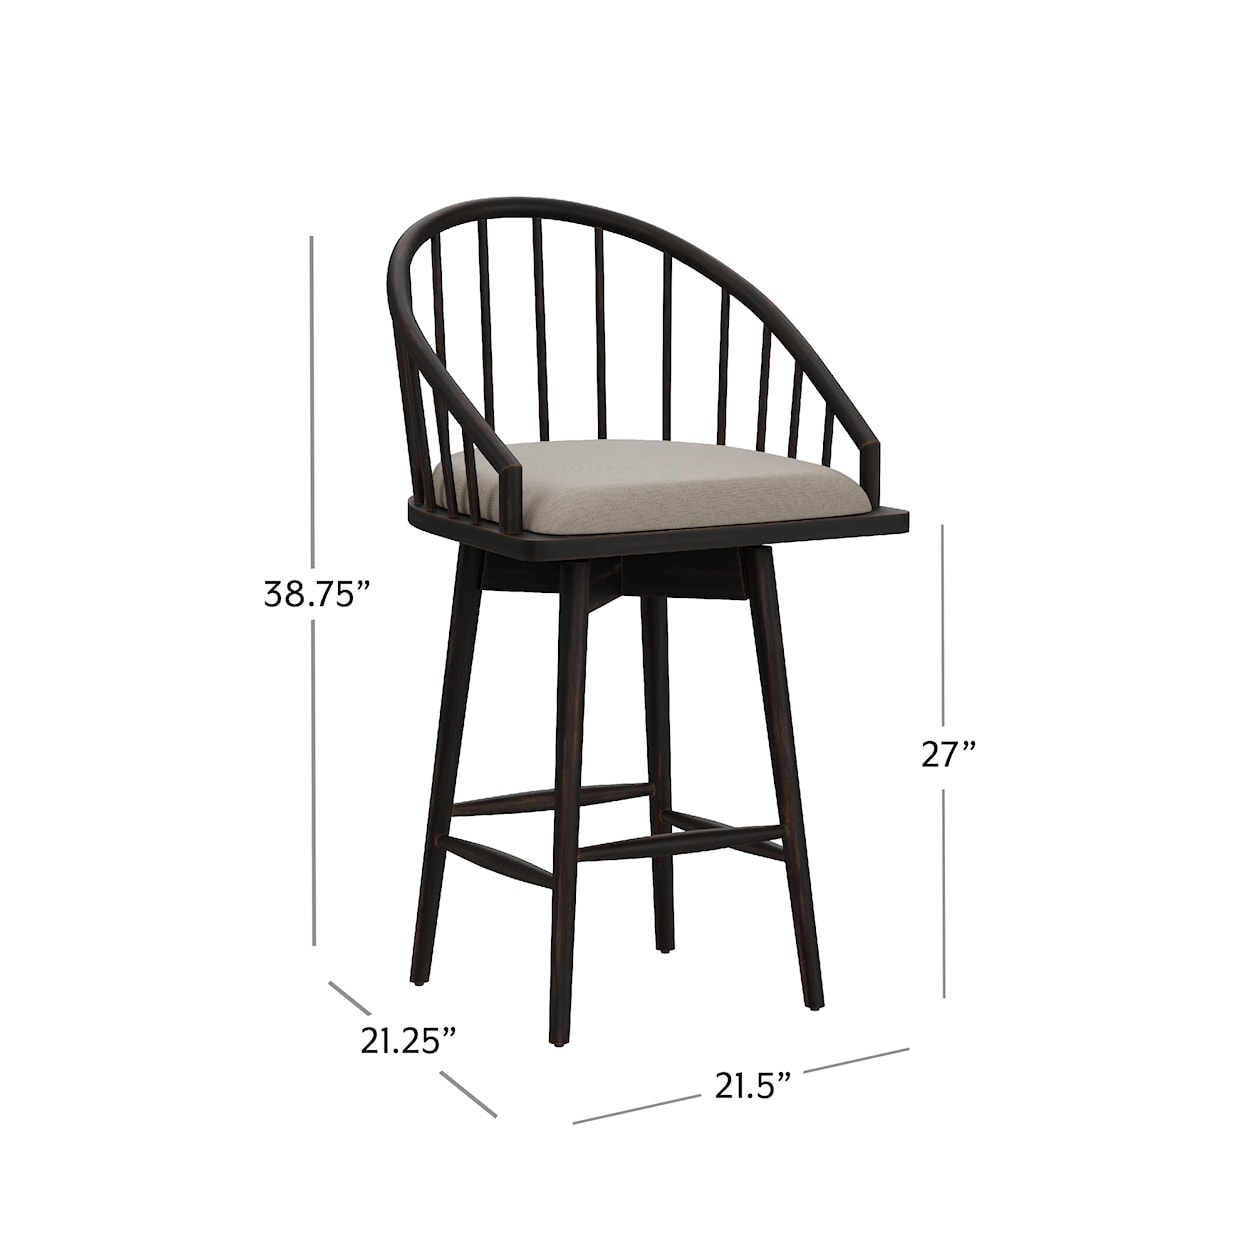 Hillsdale Braddock Counter and Bar Stools